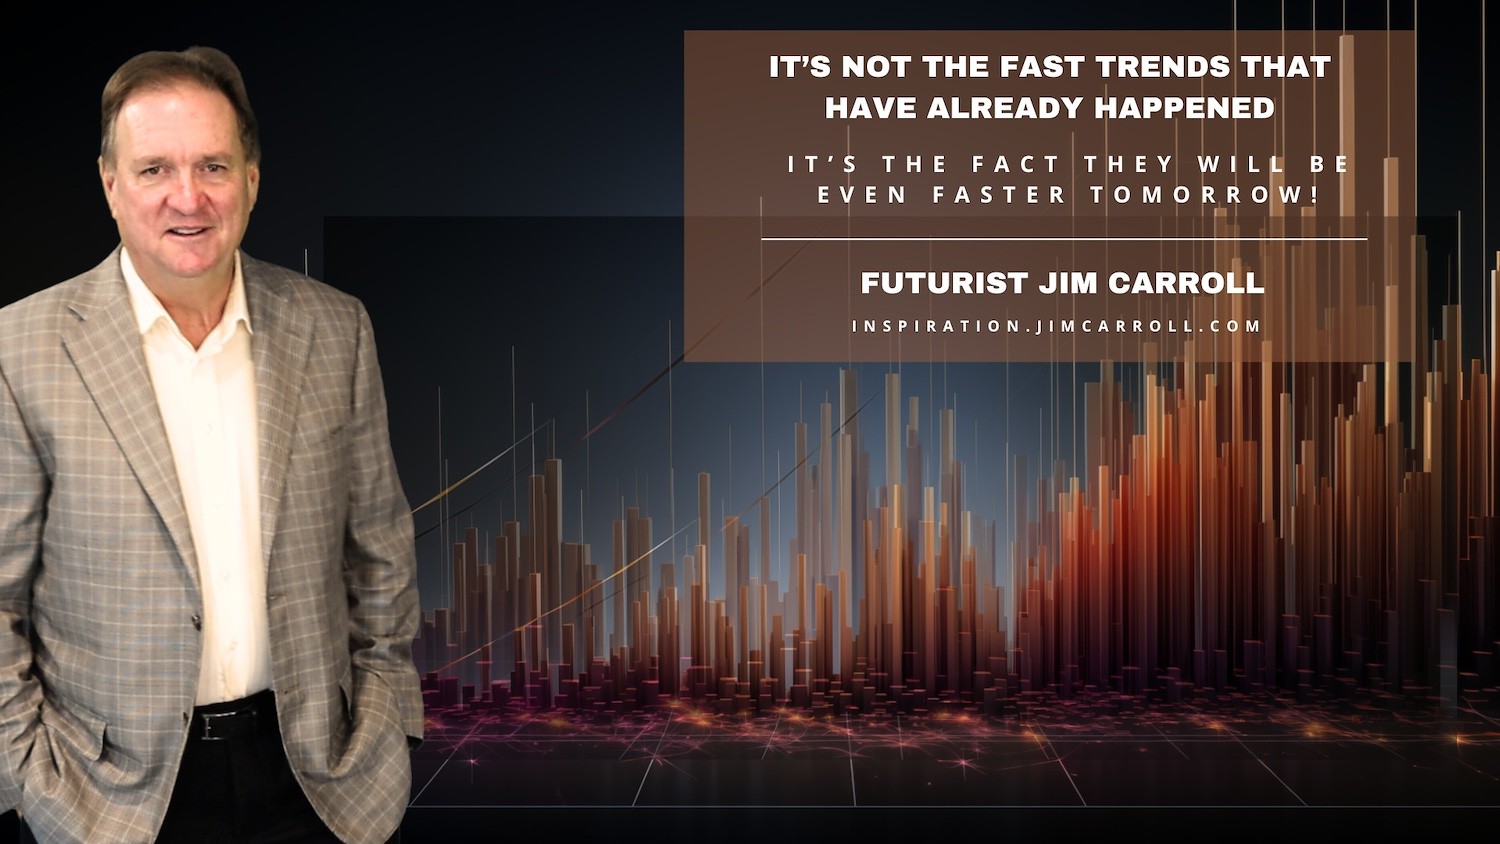 "It's not the fast trends that have already happened. It's the fact they will be even faster tomorrow!" - Futurist Jim Carroll